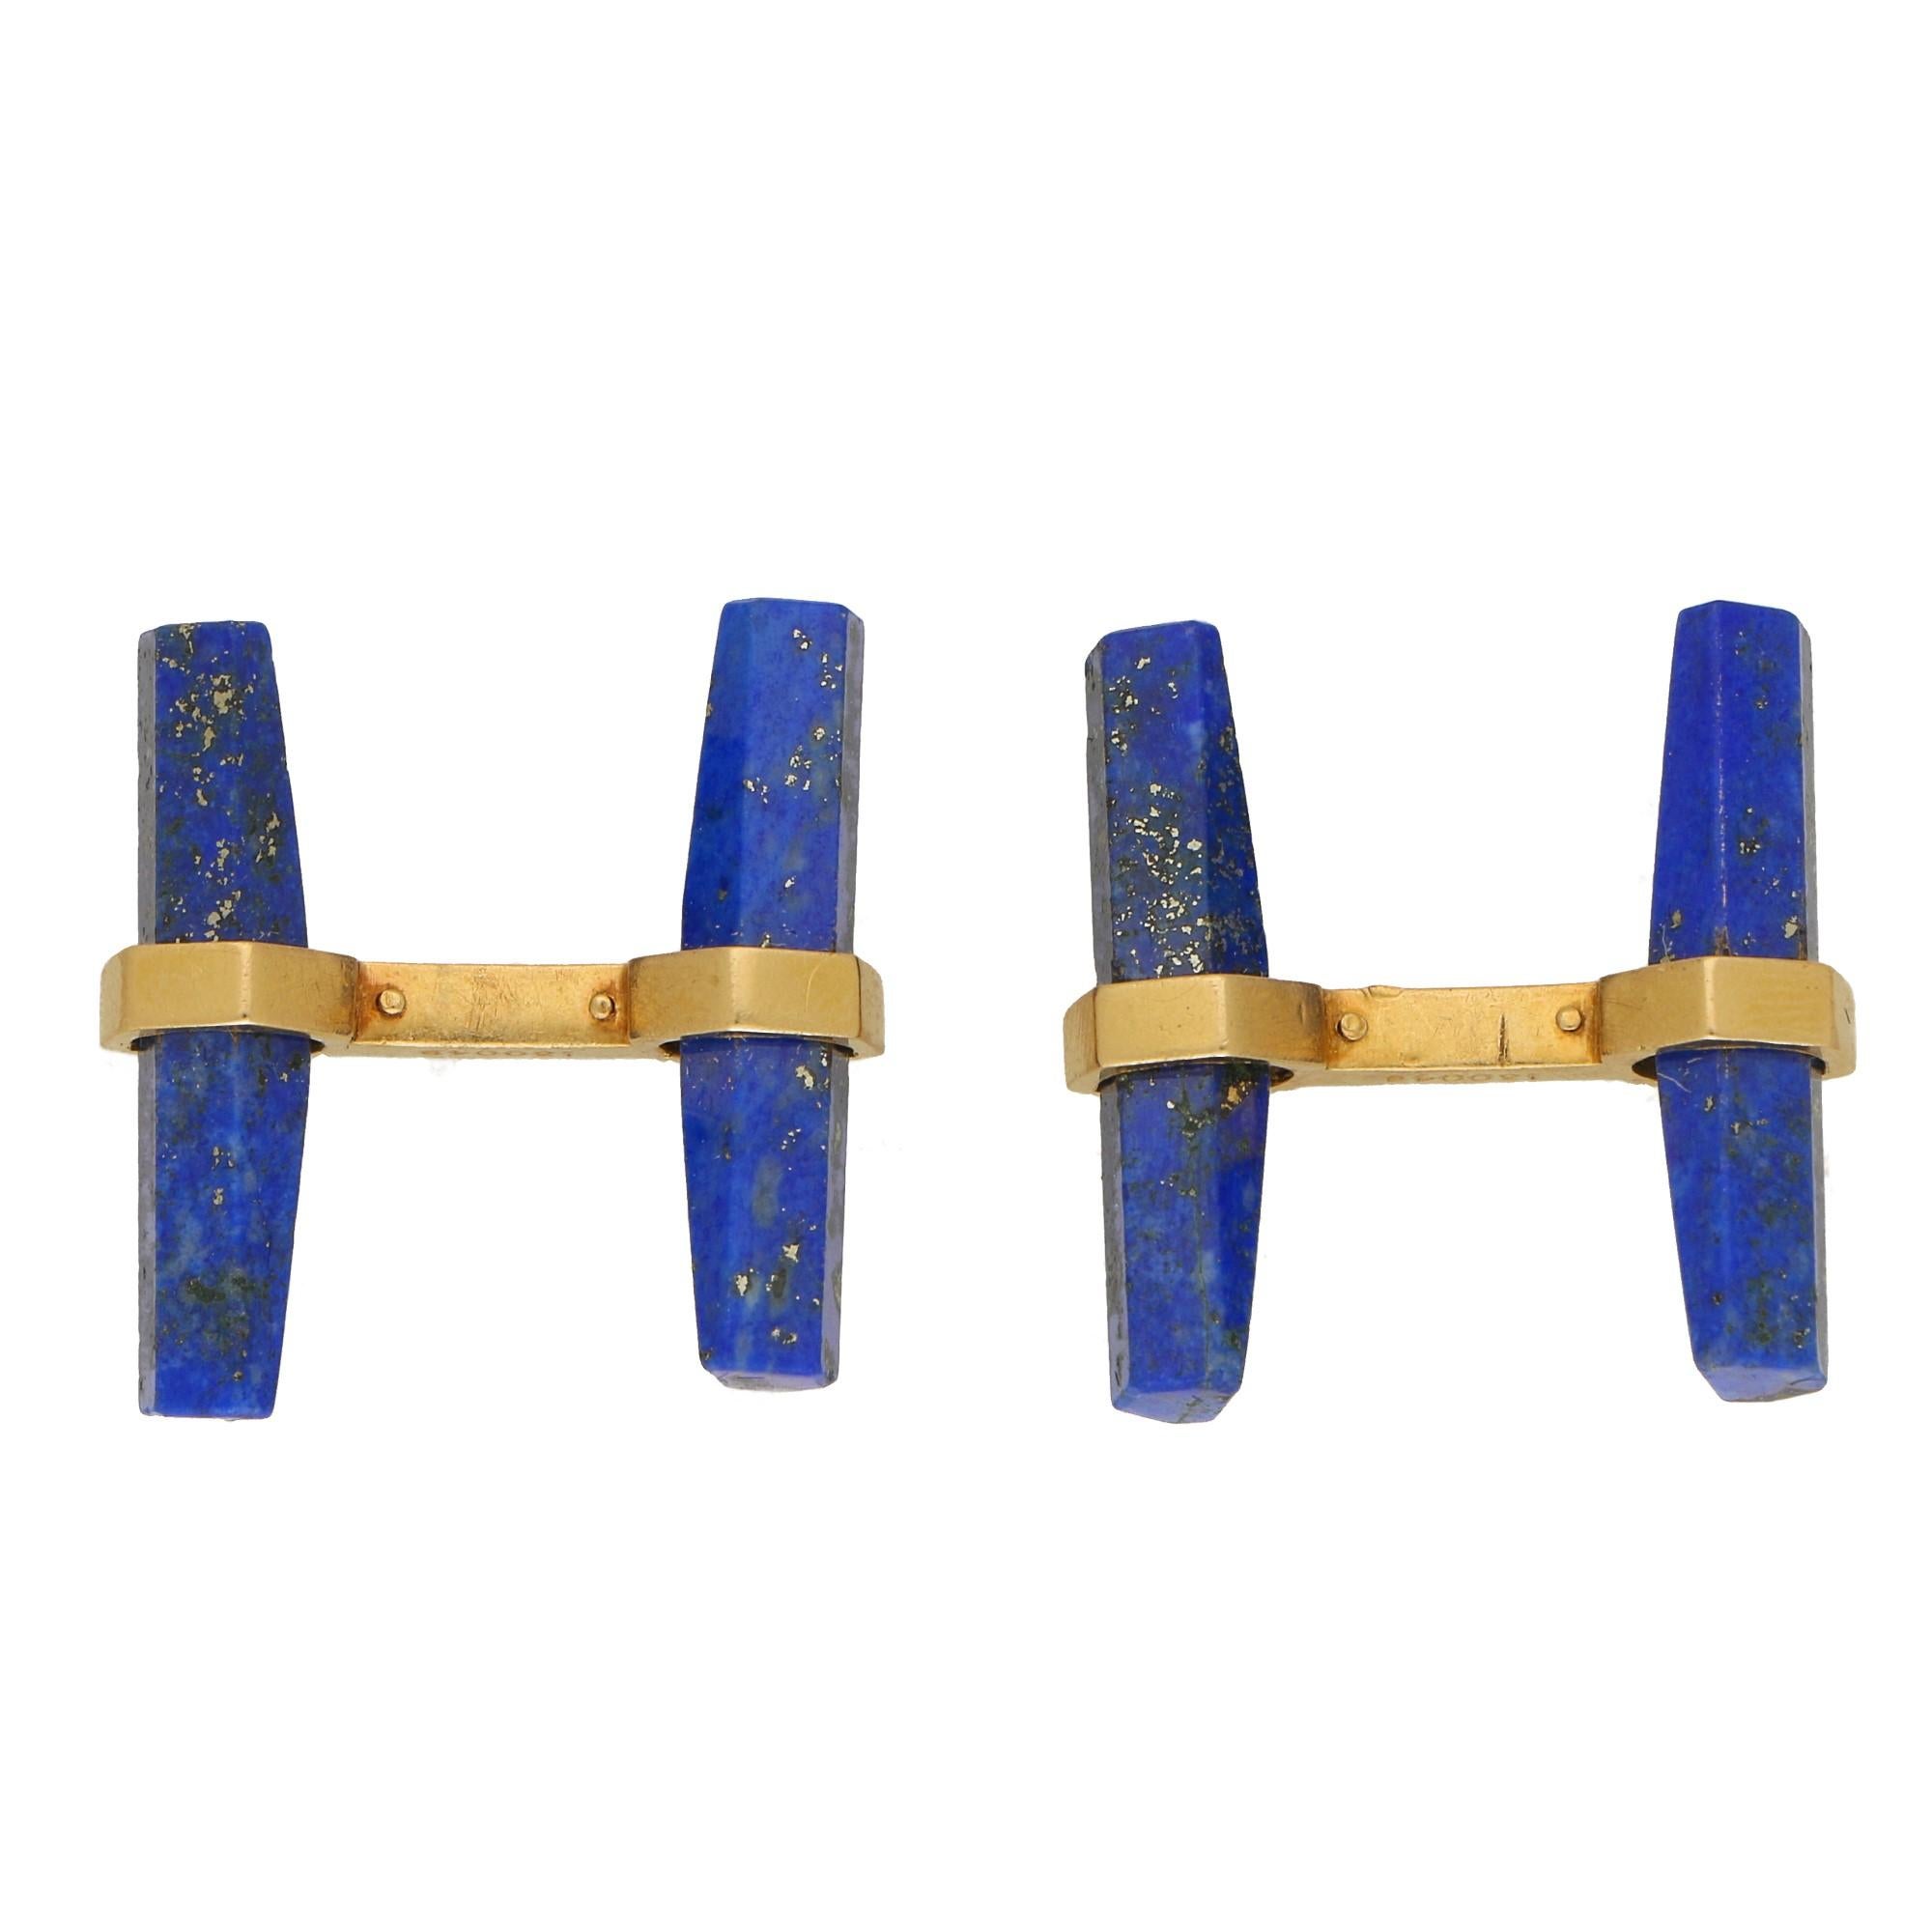 Cartier Lapis Lazuli and Coral Interchangeable Baton Cufflink Set In Good Condition For Sale In London, GB